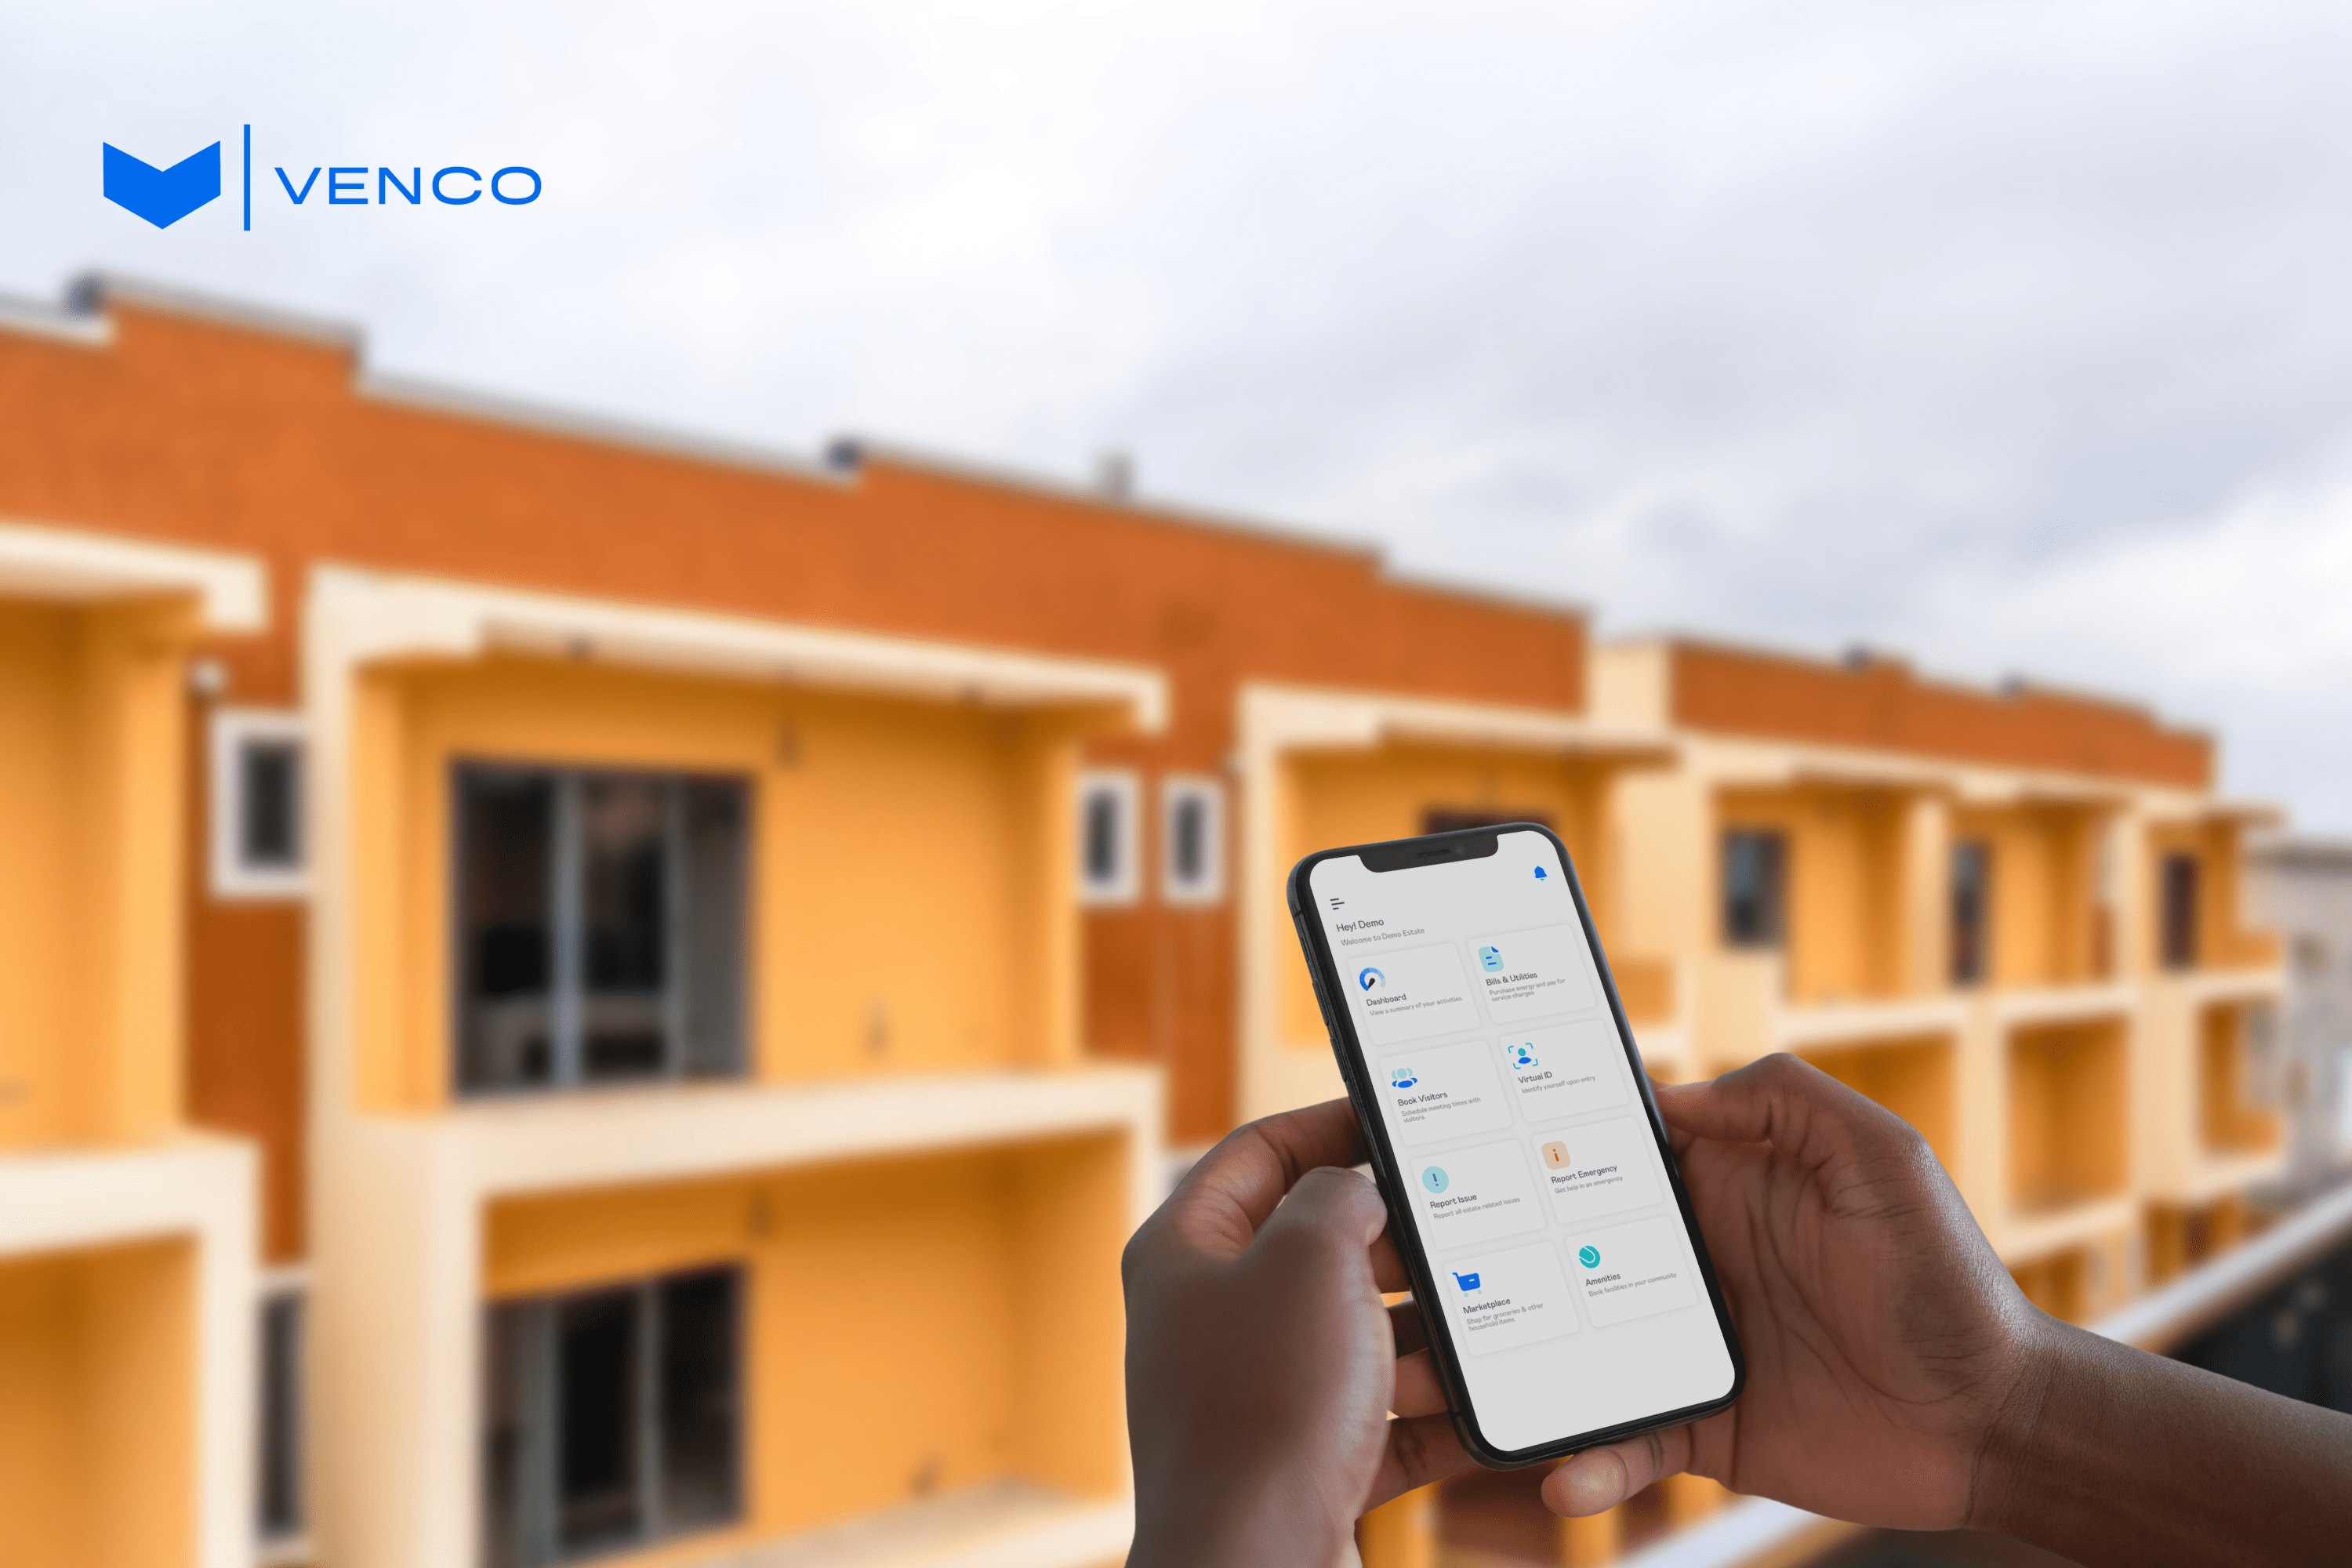 VENCO secures $670,000 pre-seed funding to deliver digital solutions and enhance the living experience in Africa.